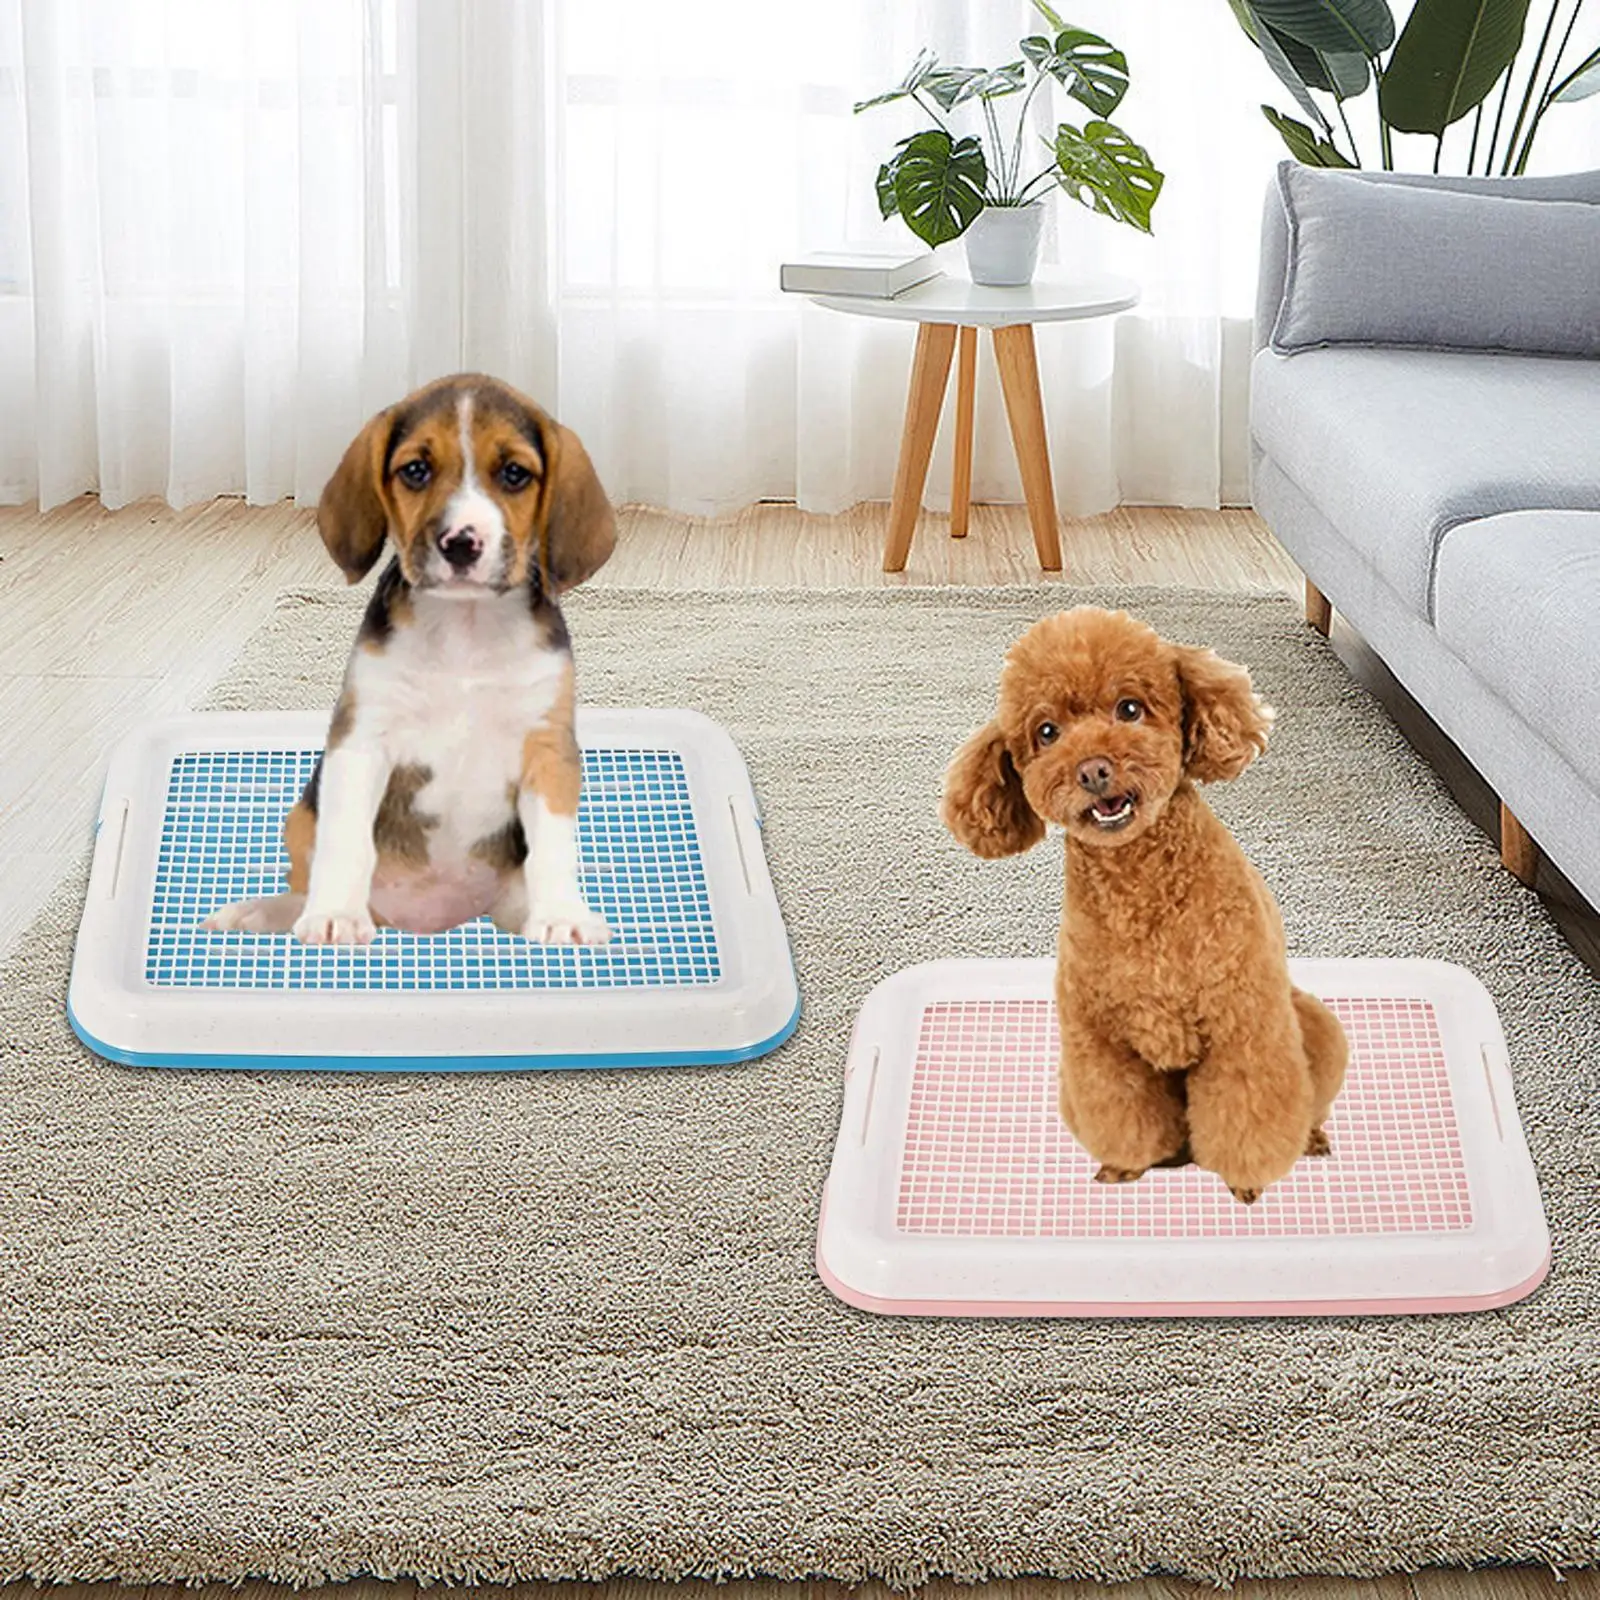 Dog Potty Toilet Training Tray Indoor Anti Slip Easy to Clean Removable Dog Litter Box Mesh Training Tray for Small Dogs Puppies